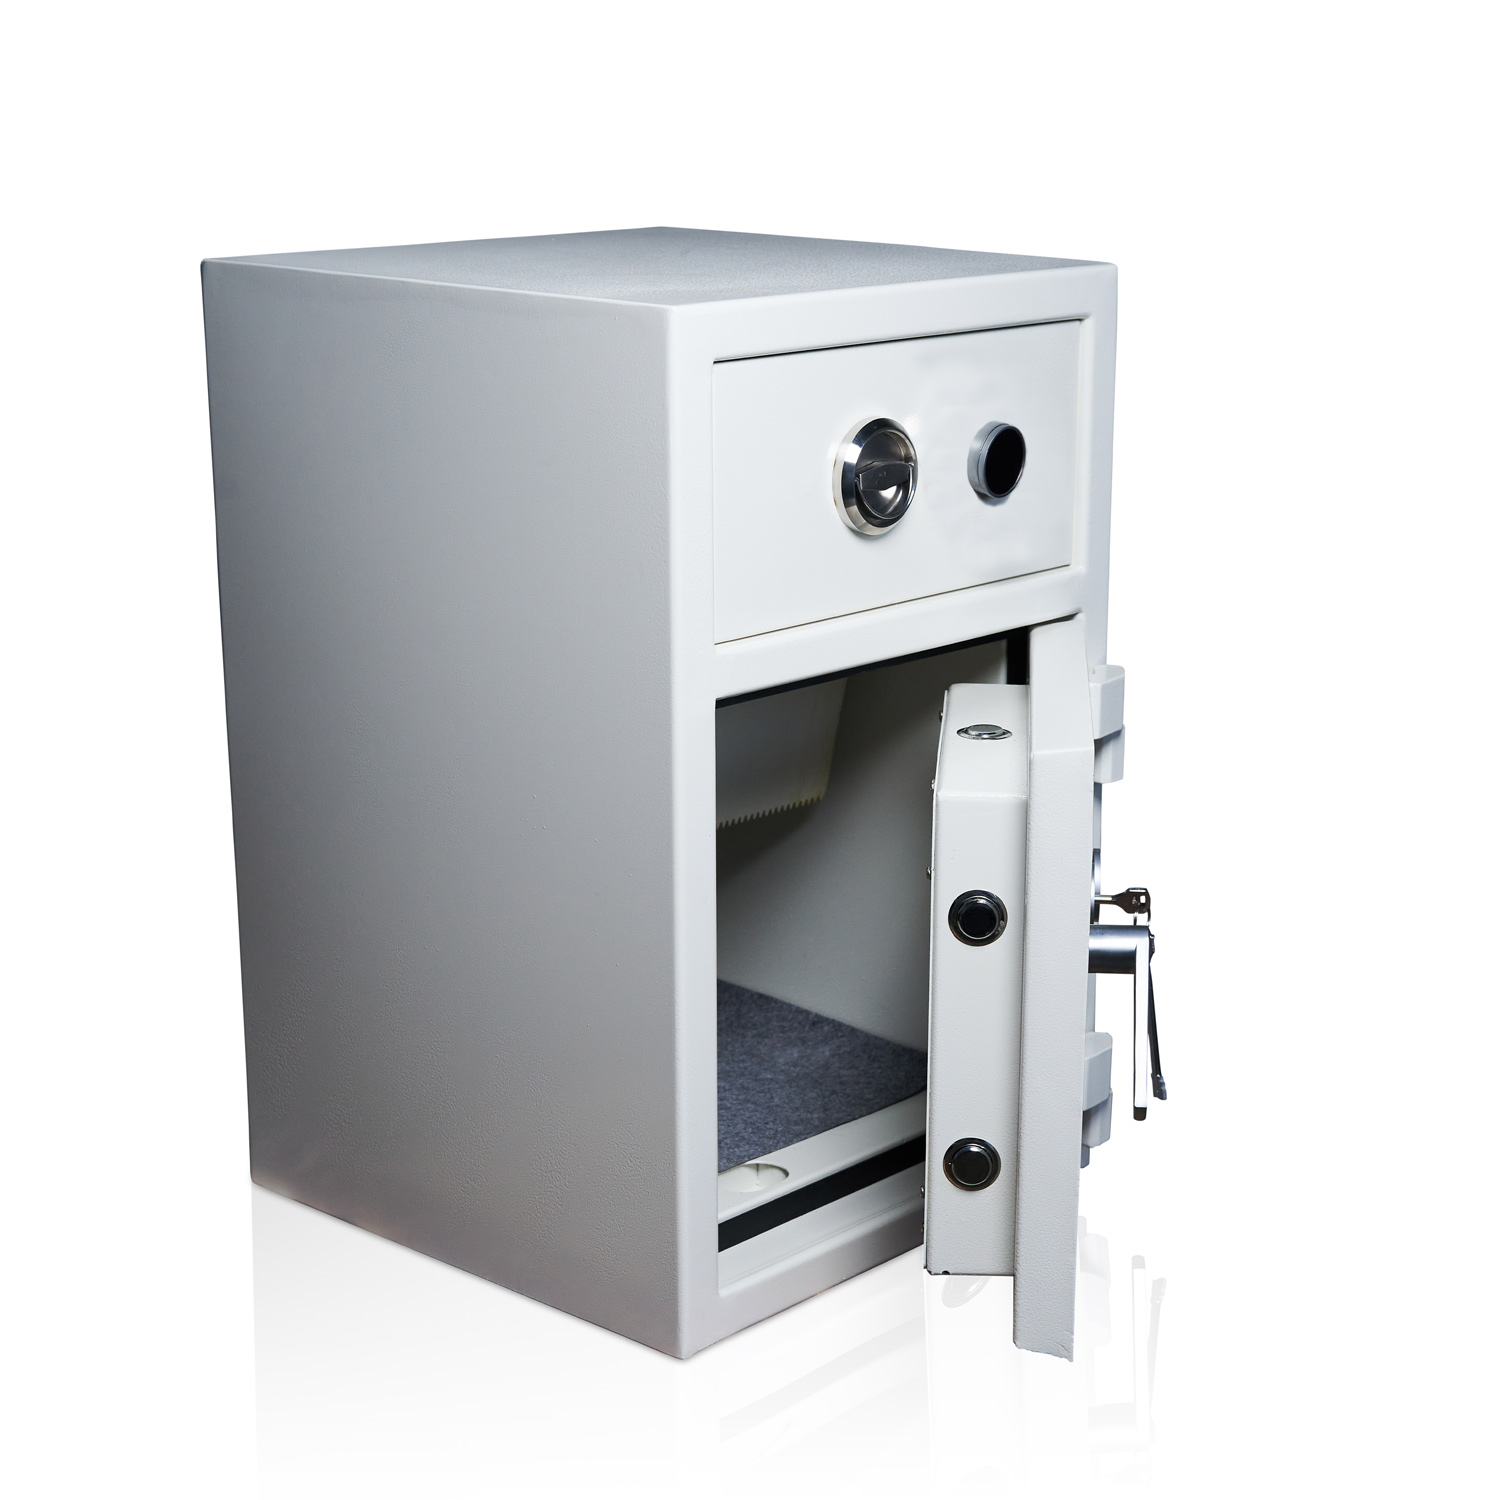 Deposit safe with drawer and key lock | Safe door with 6 locking bolts & key lock